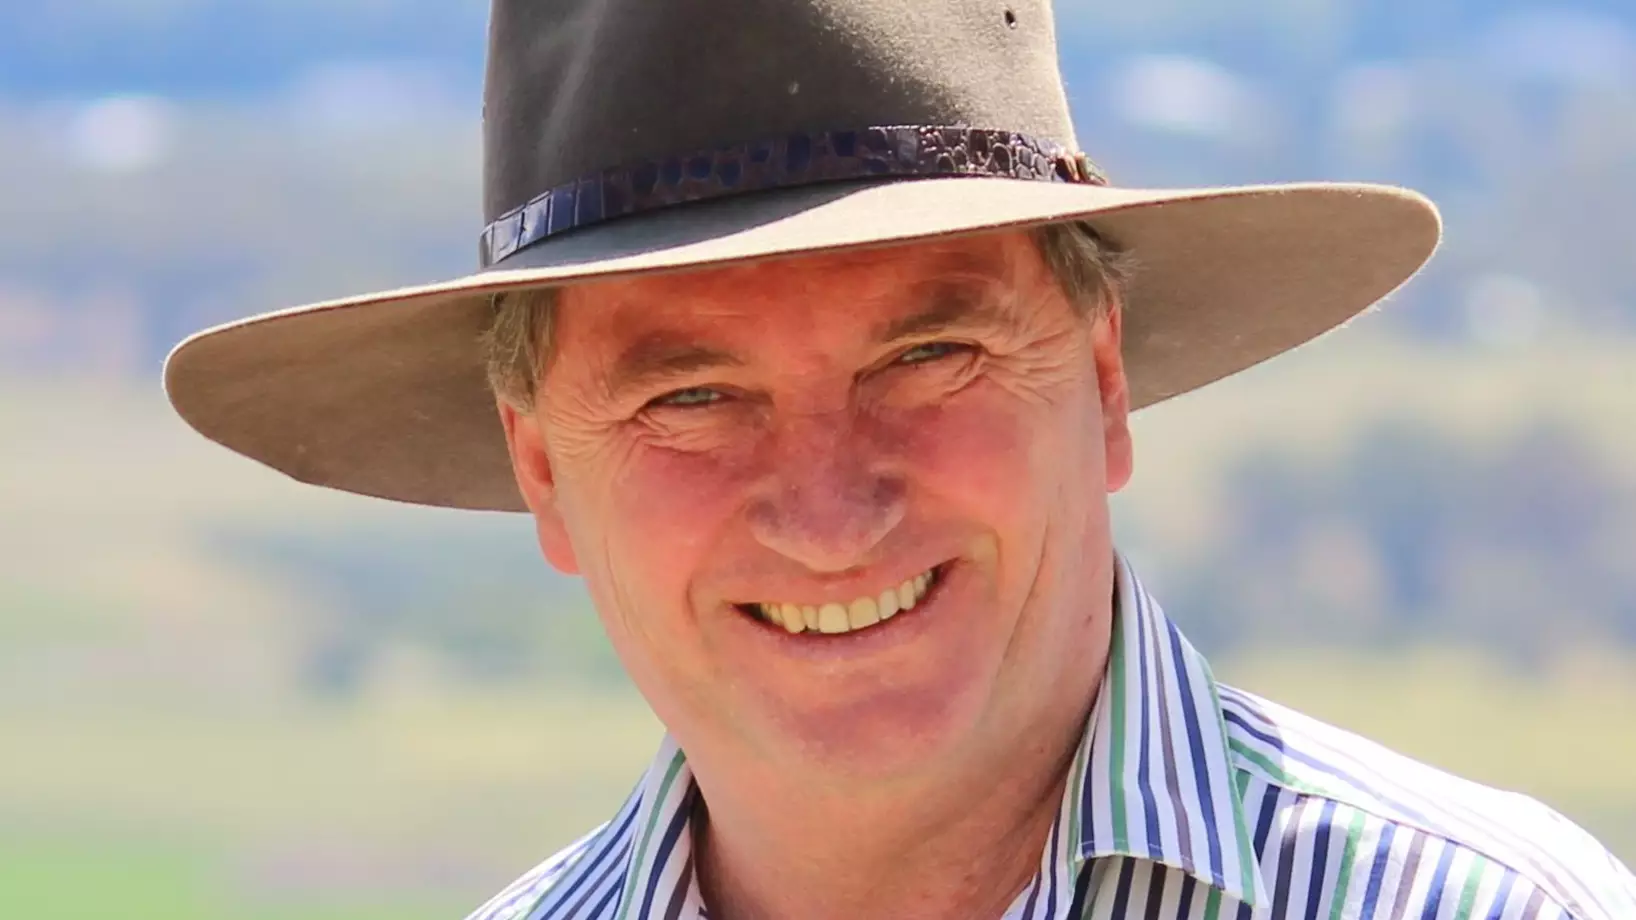 Barnaby Joyce Slammed For Saying Two People Who Died In Bushfires 'Most Likely' Voted For Greens